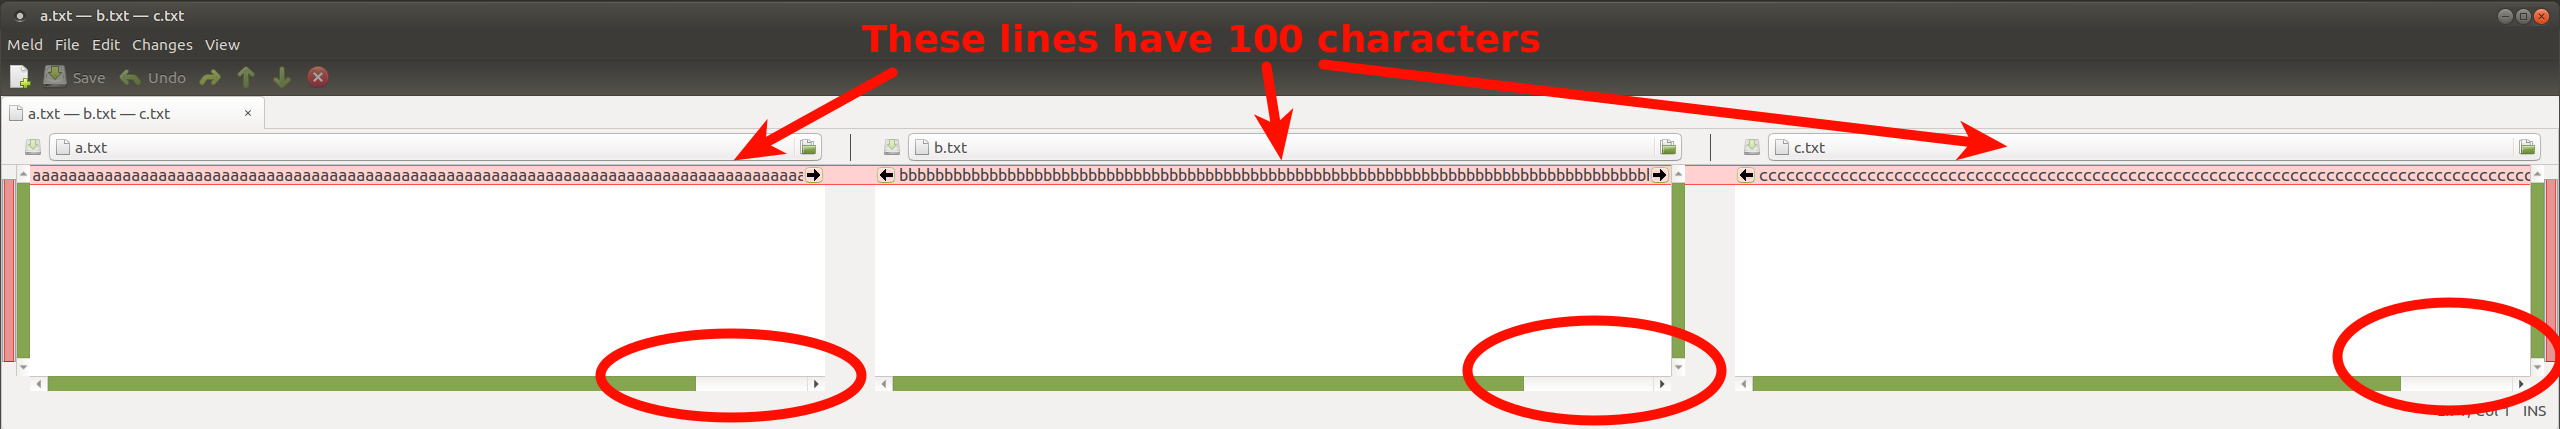 3-way merge with 100 character lines